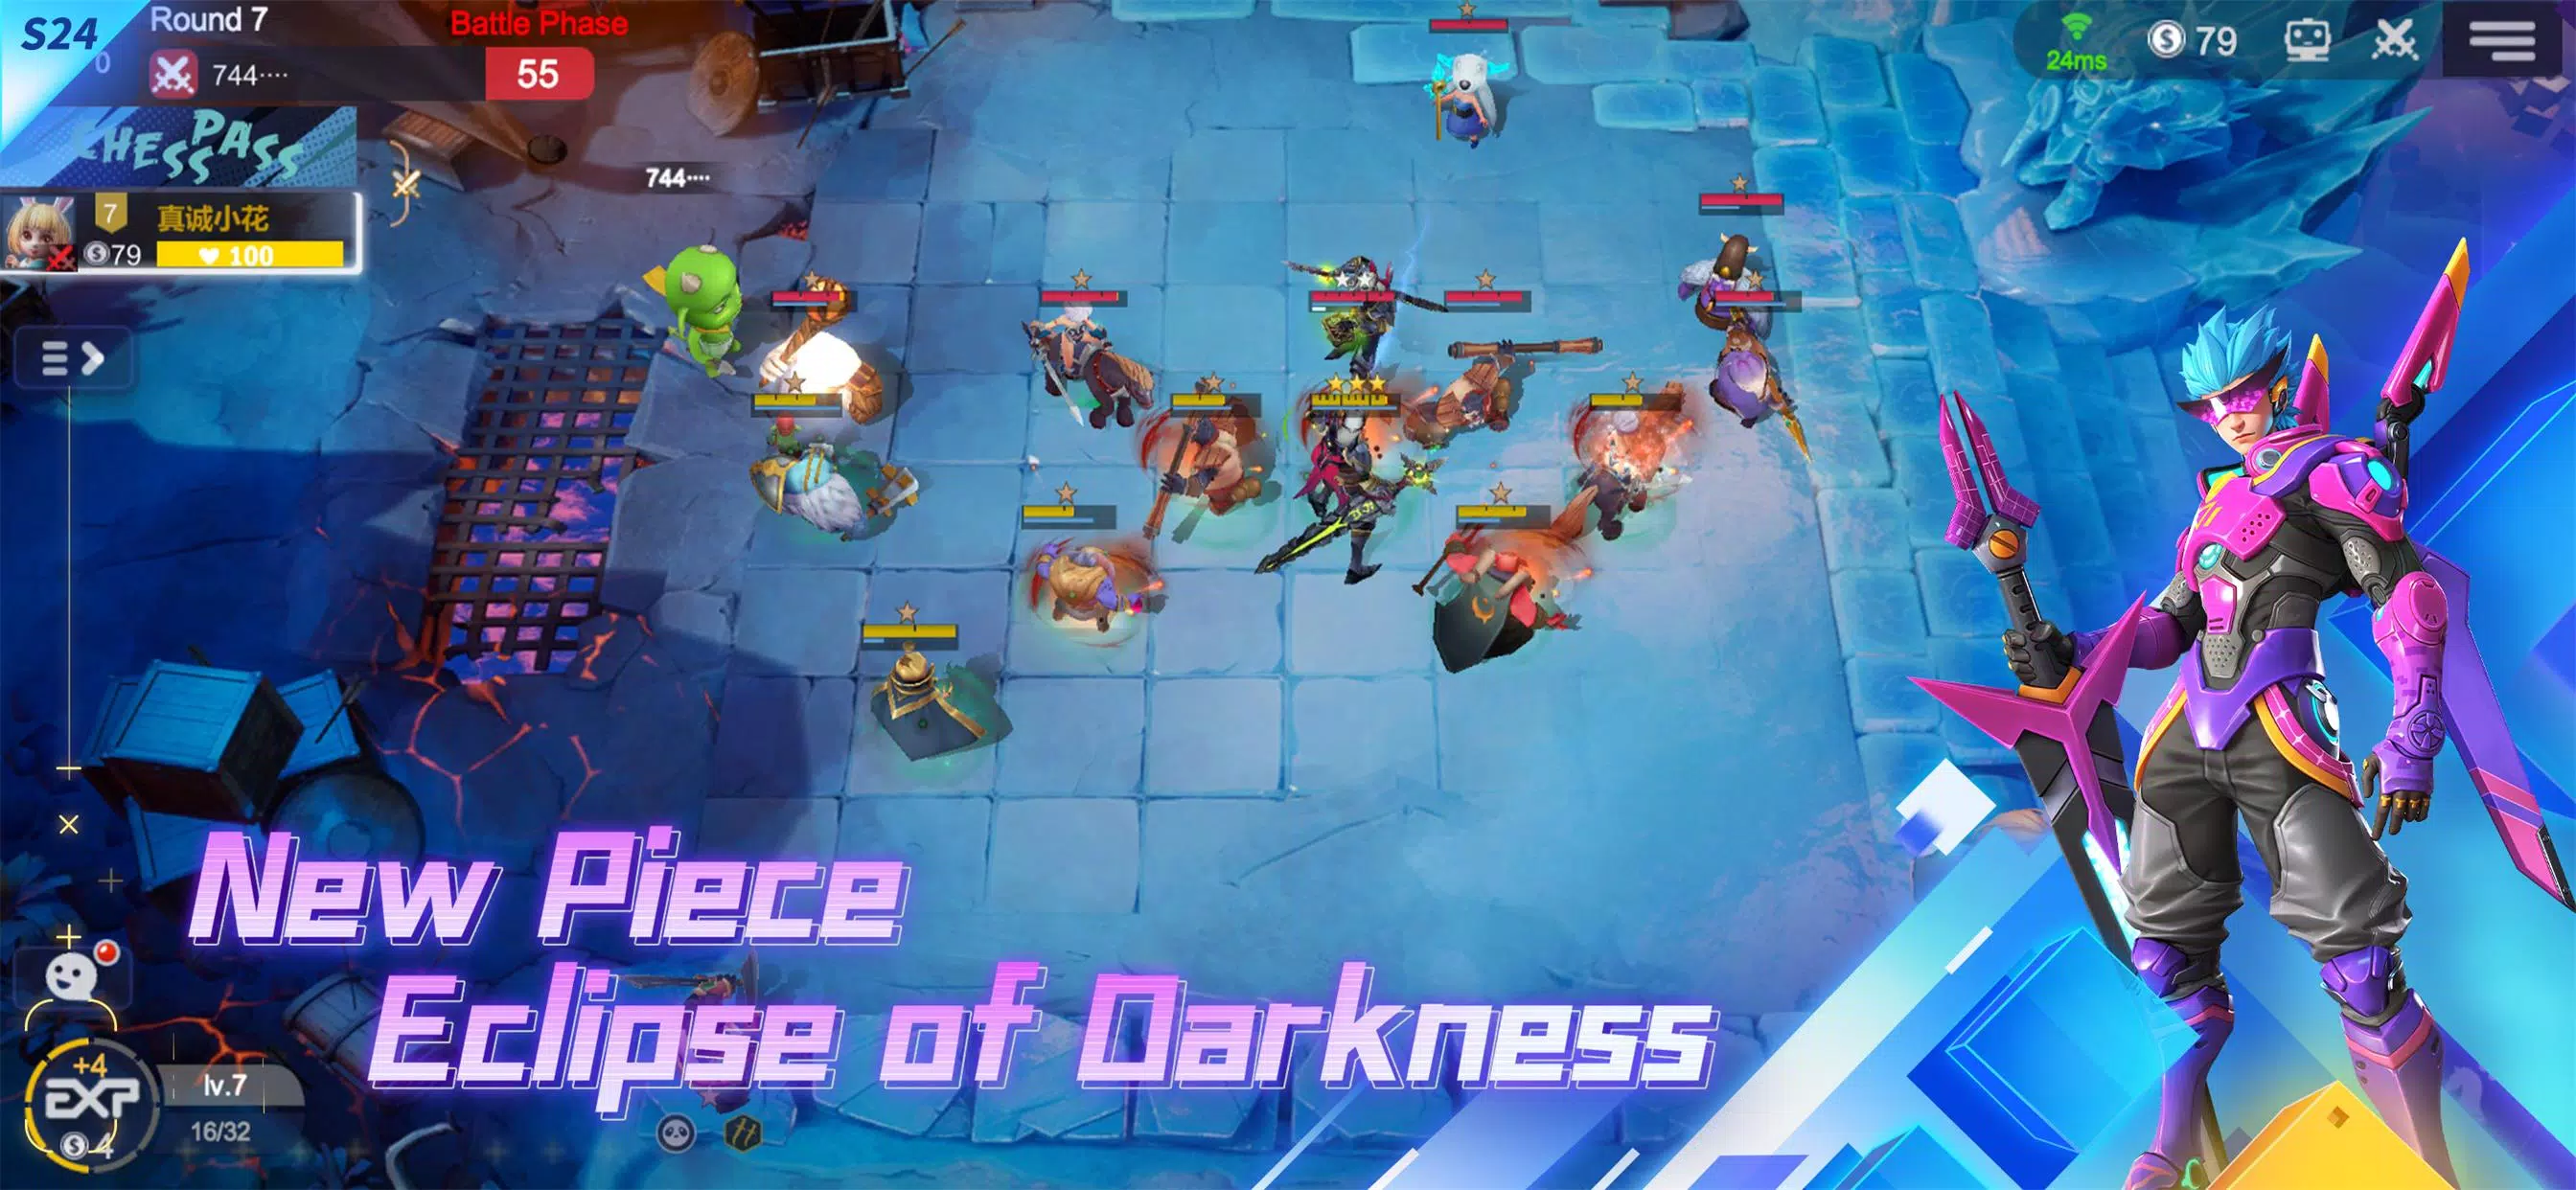 Auto Chess for Android - Download the APK from Uptodown